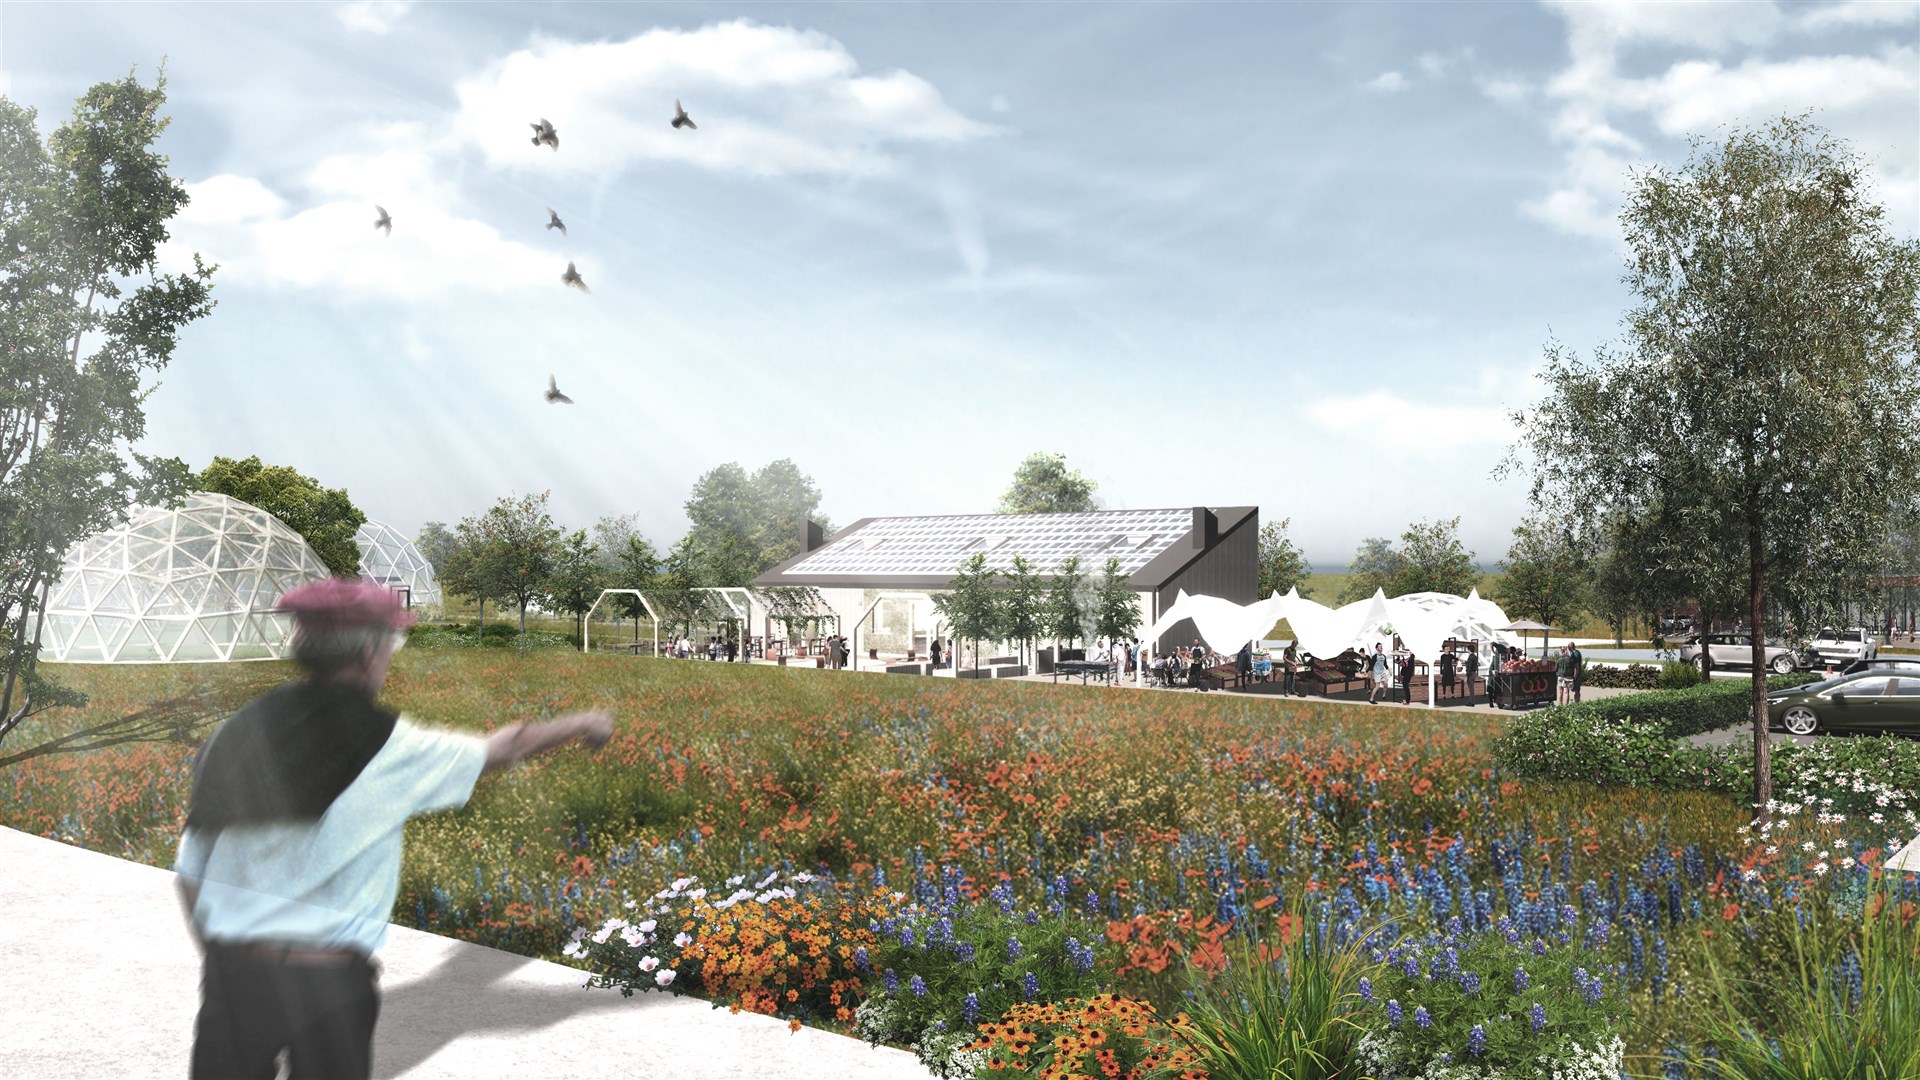 An artist's impression of the site from the rear.